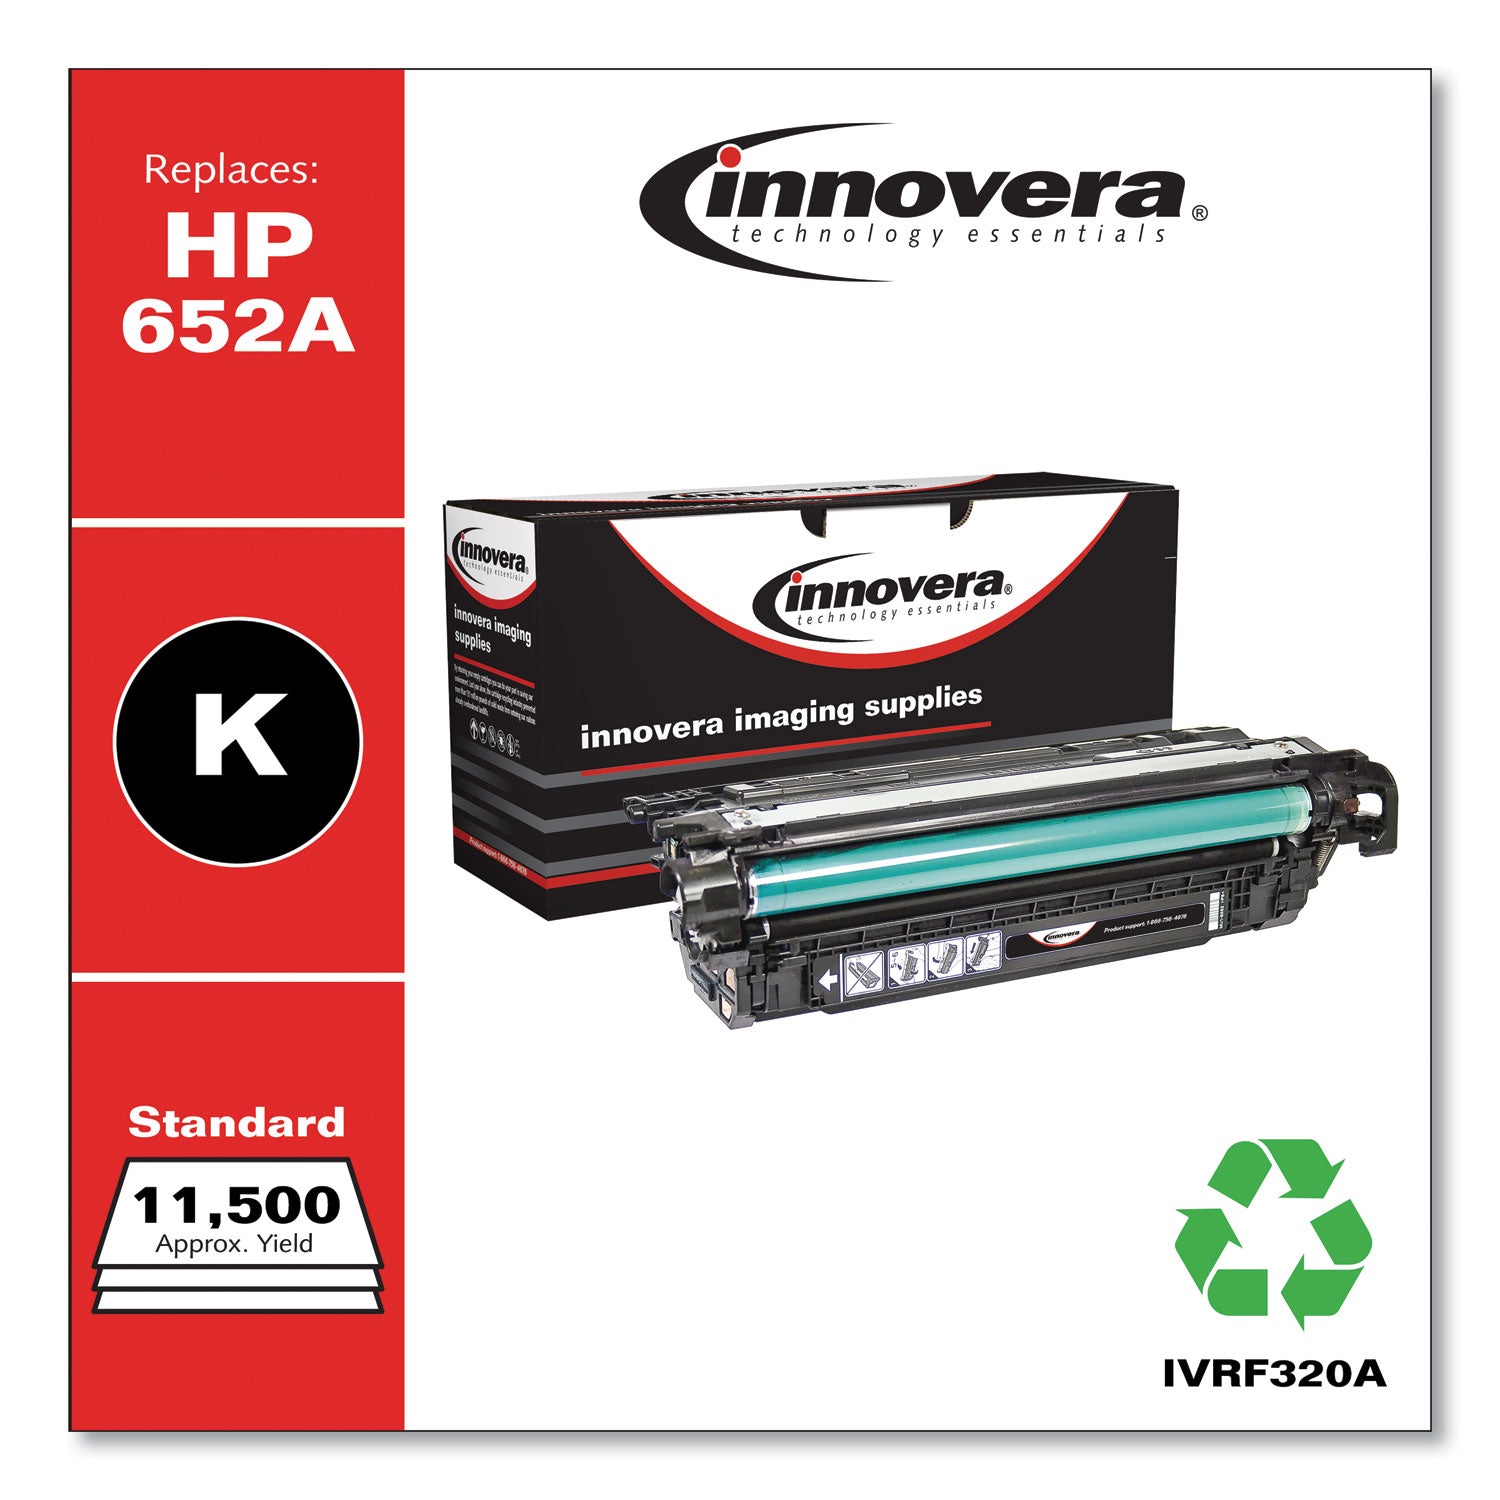 remanufactured-black-toner-replacement-for-652a-cf320a-11500-page-yield_ivrf320a - 2